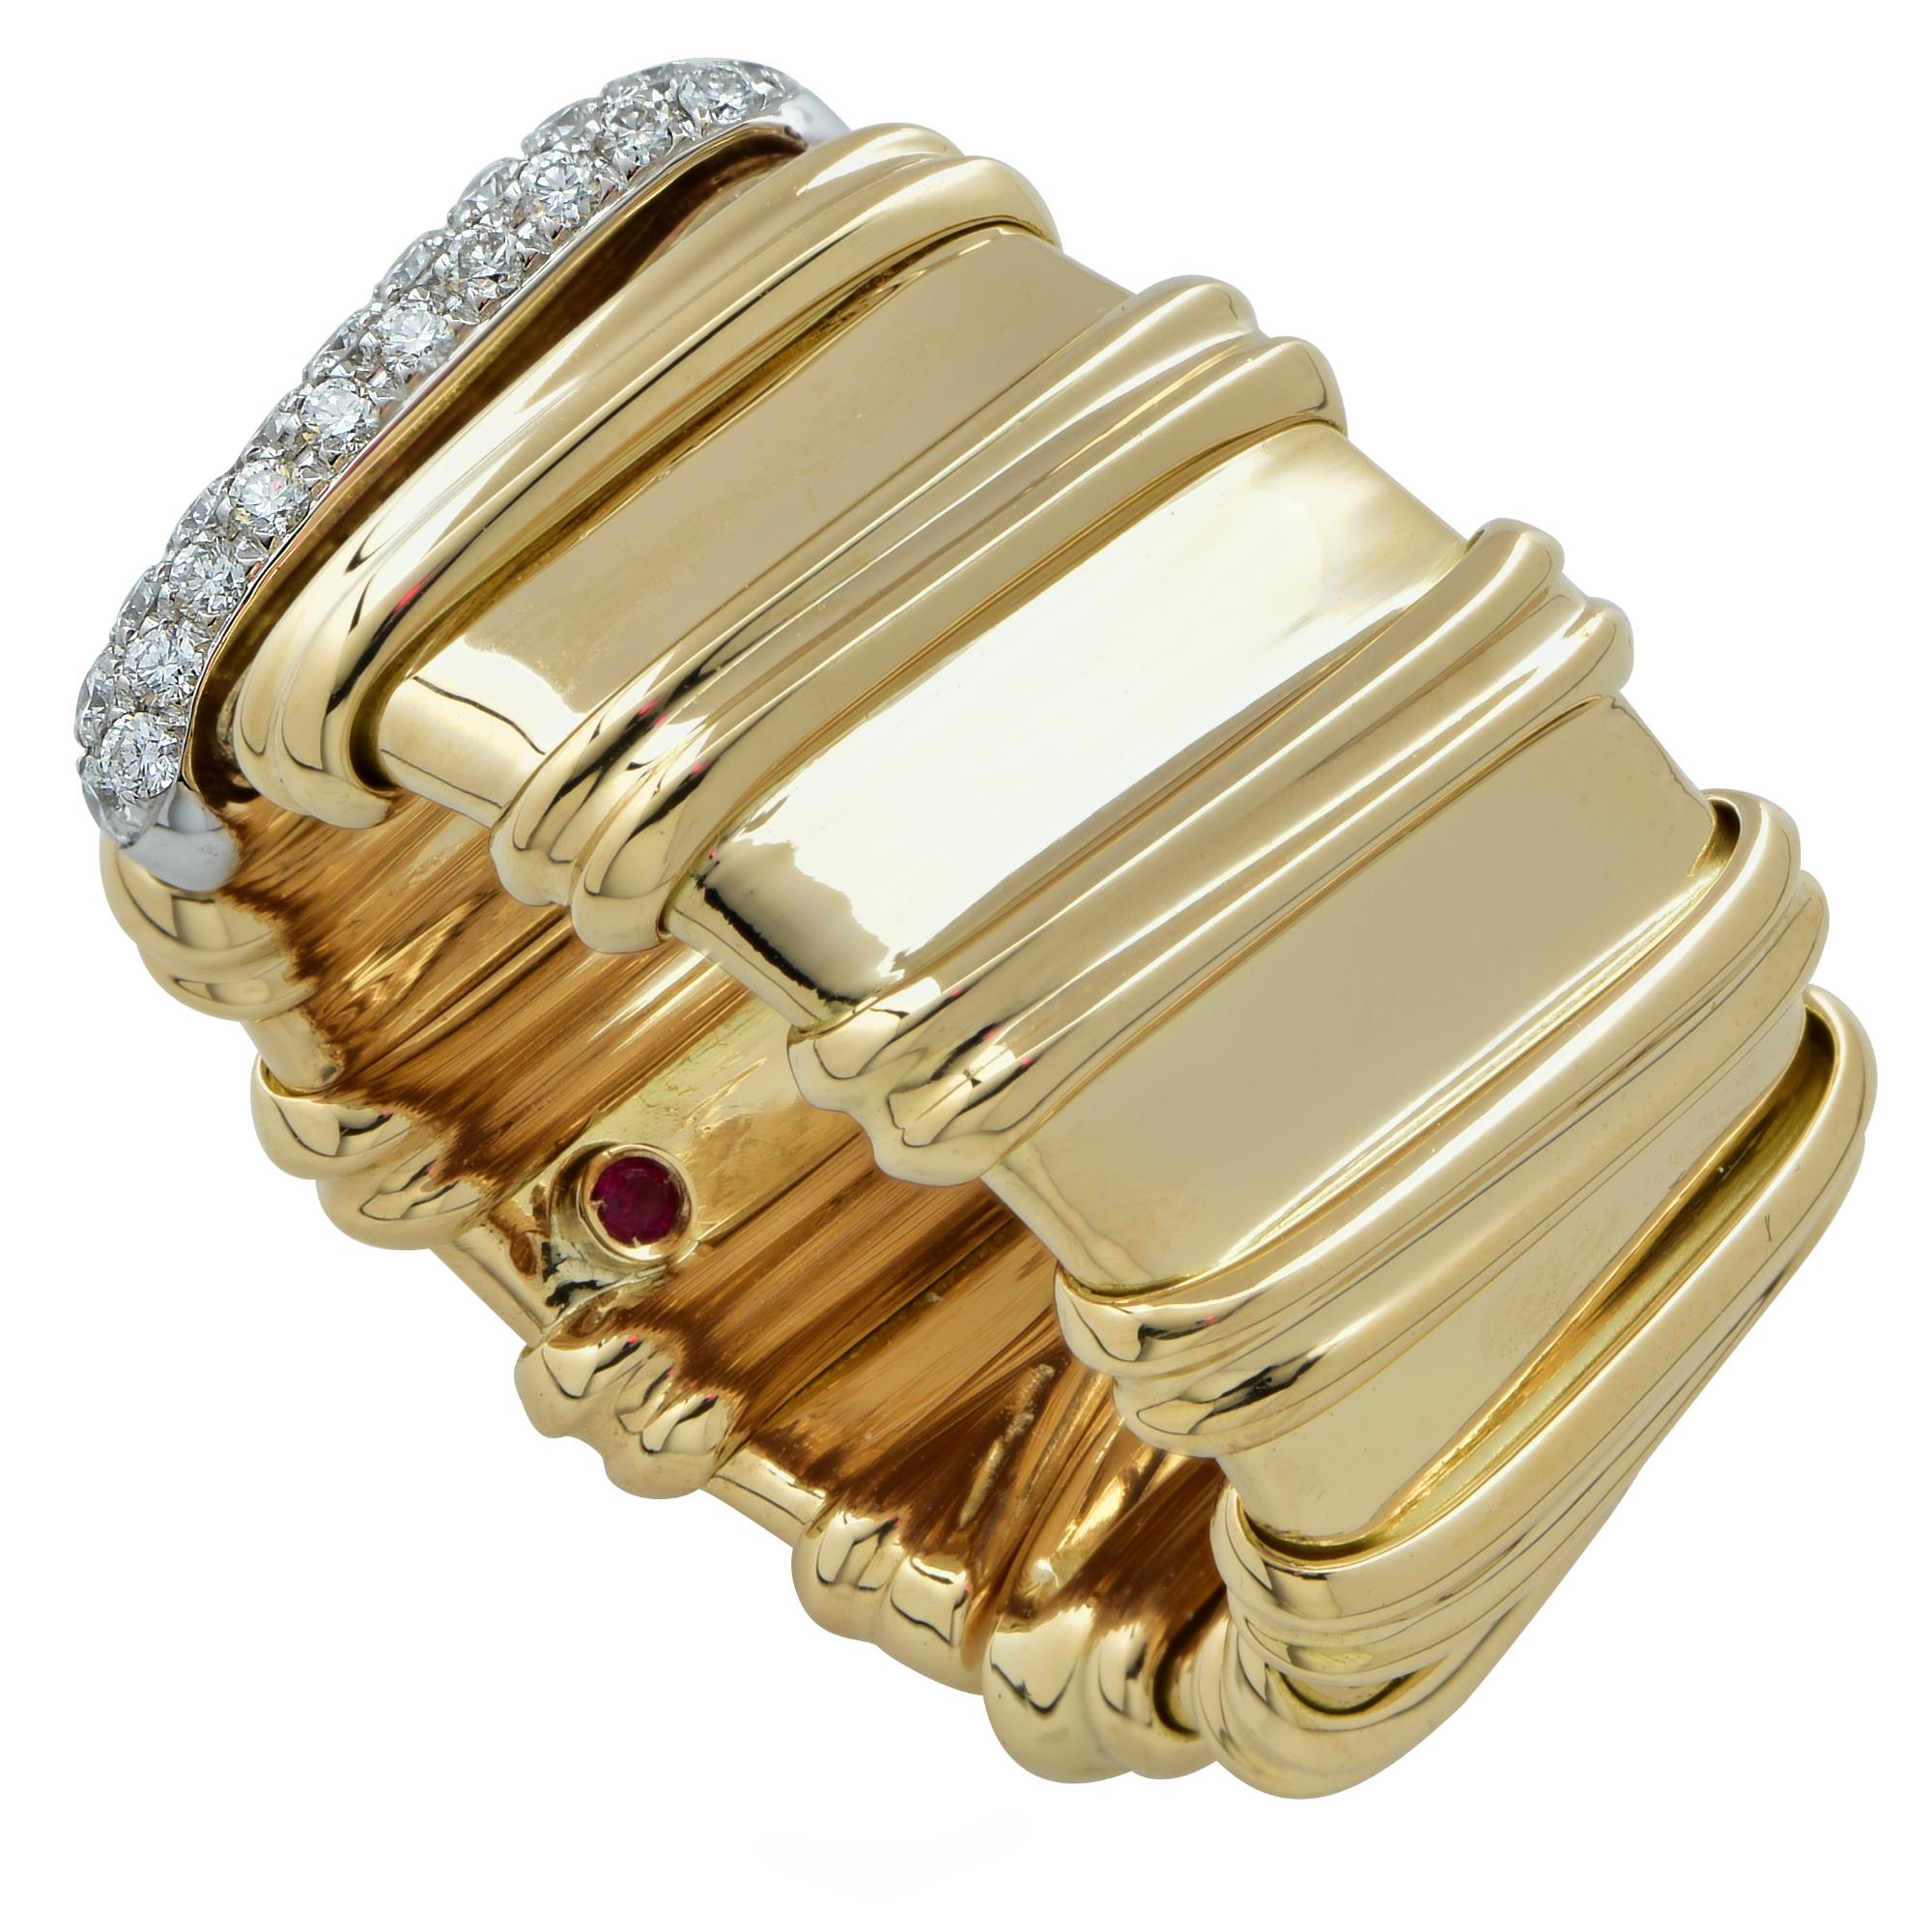 Stunning Roberto Coin Flexible band crafted in 18K yellow gold featuring twelve gold double line accents, one of which is adorned with 31 round brilliant cut diamonds weighing approximately .21 carats total weight, in a pave’ setting. Featuring the